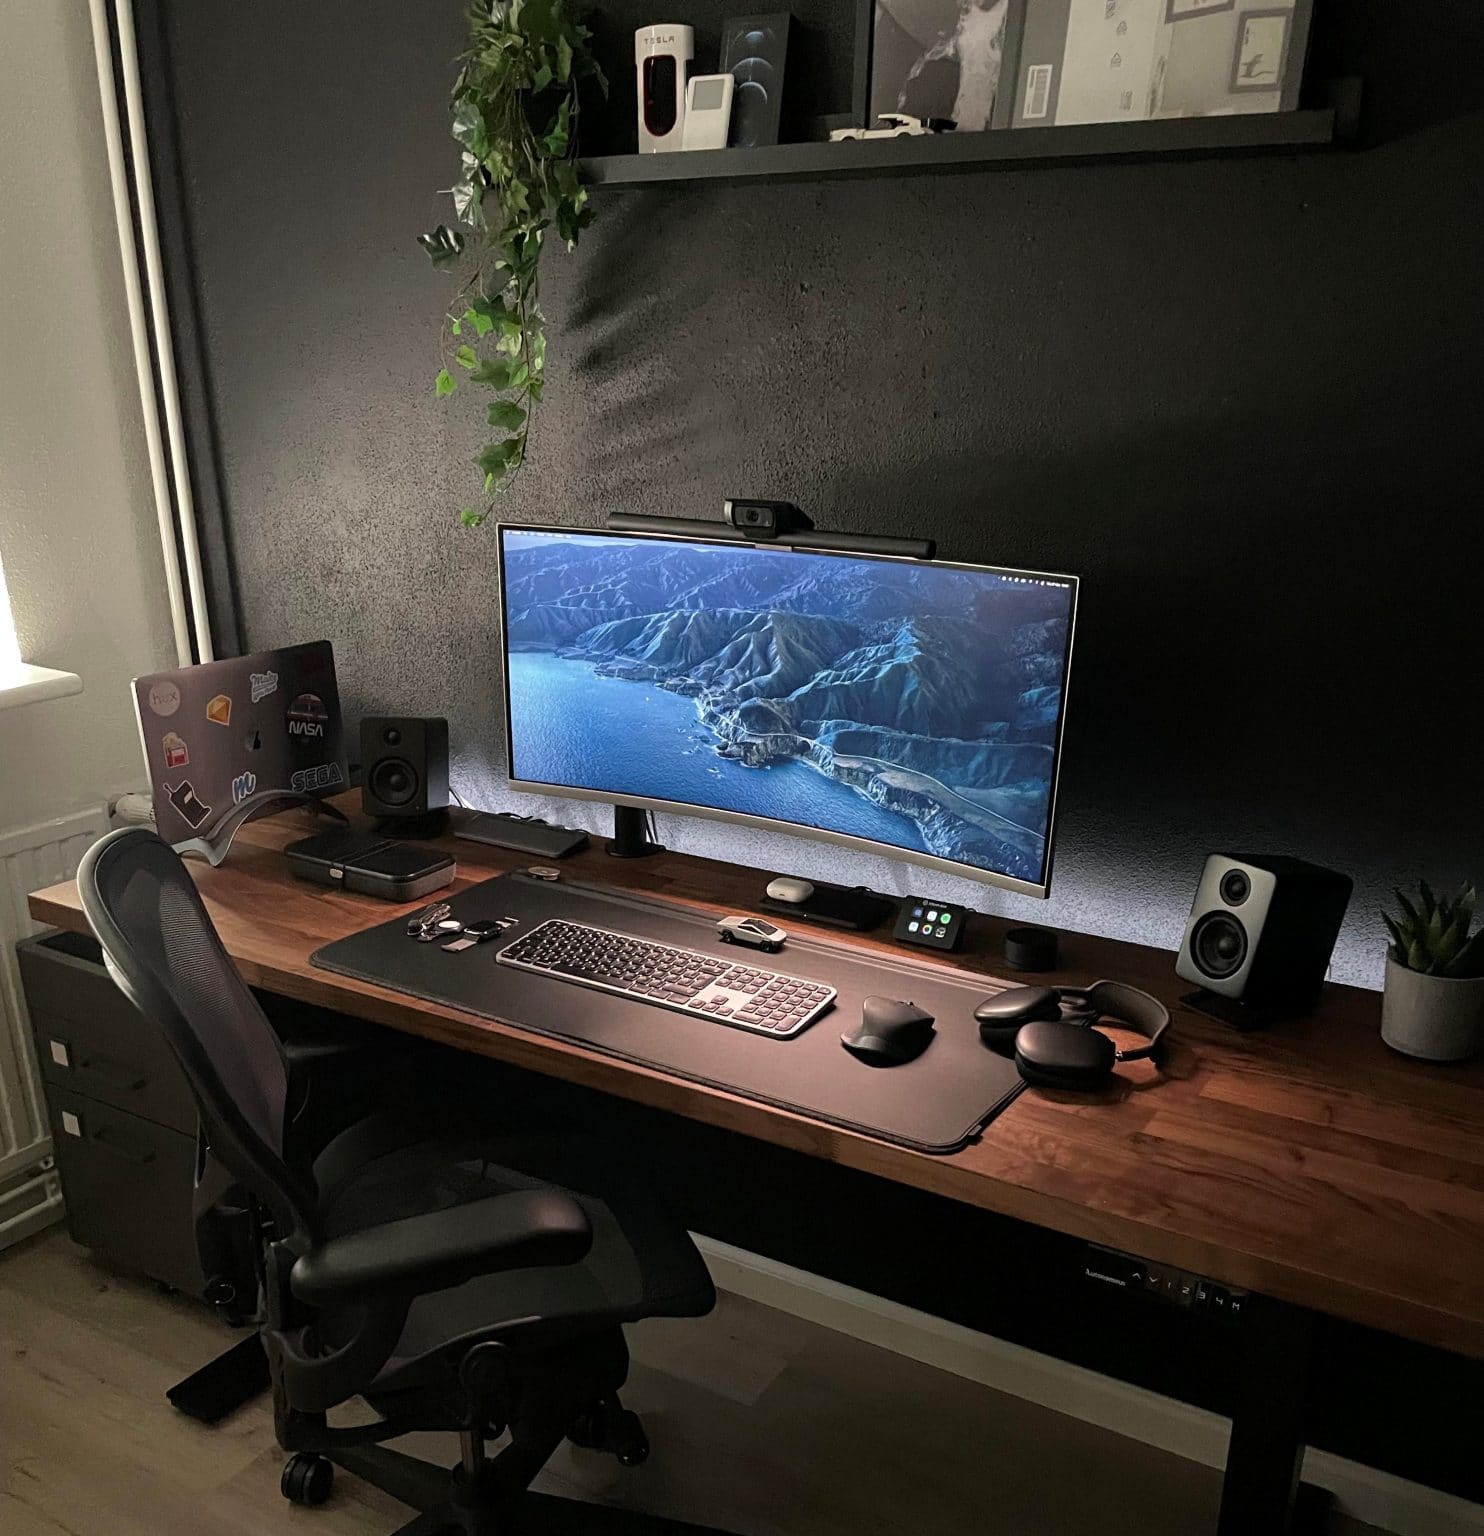 A new house calls for a first-time home office with an ultrawide monitor and plenty of toys.